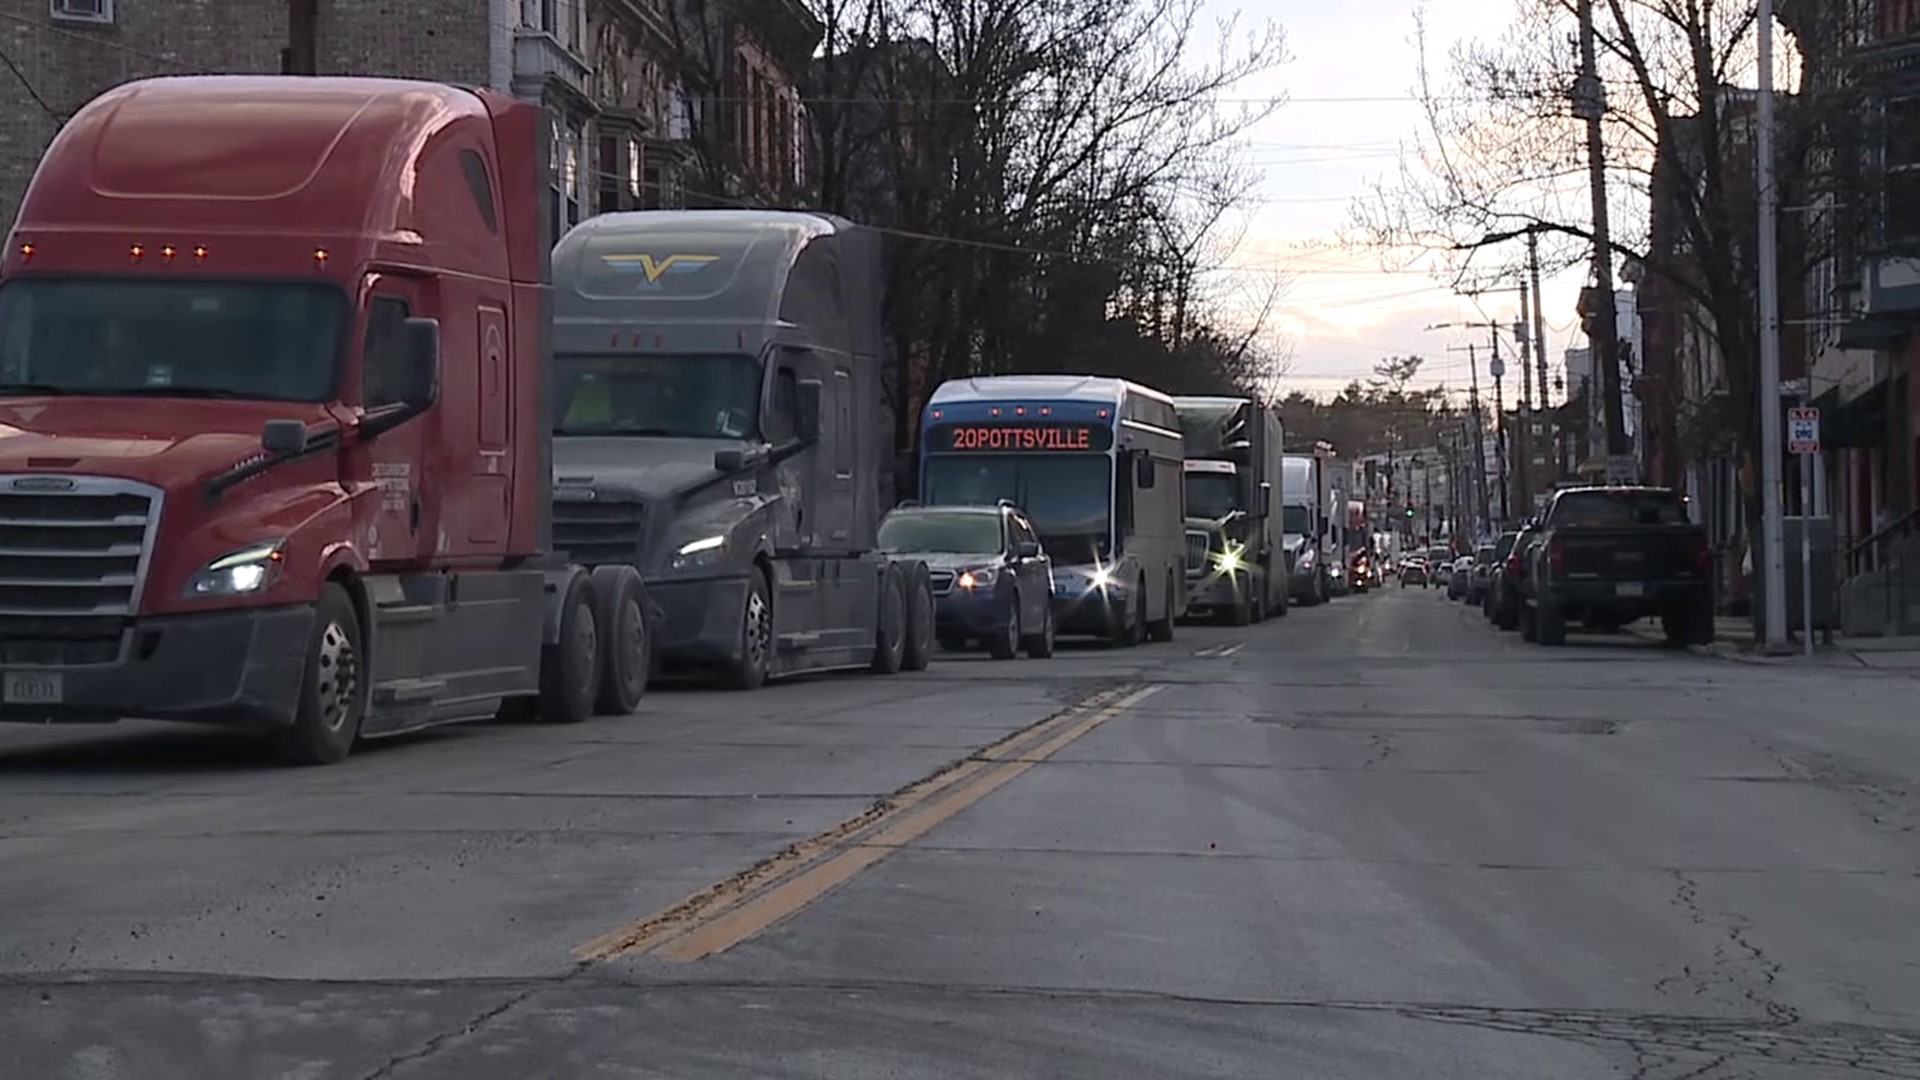 Detoured traffic from the pile-up caused congestion all day long in the city of Pottsville with tractor-trailers and other vehicles clogging the downtown area.